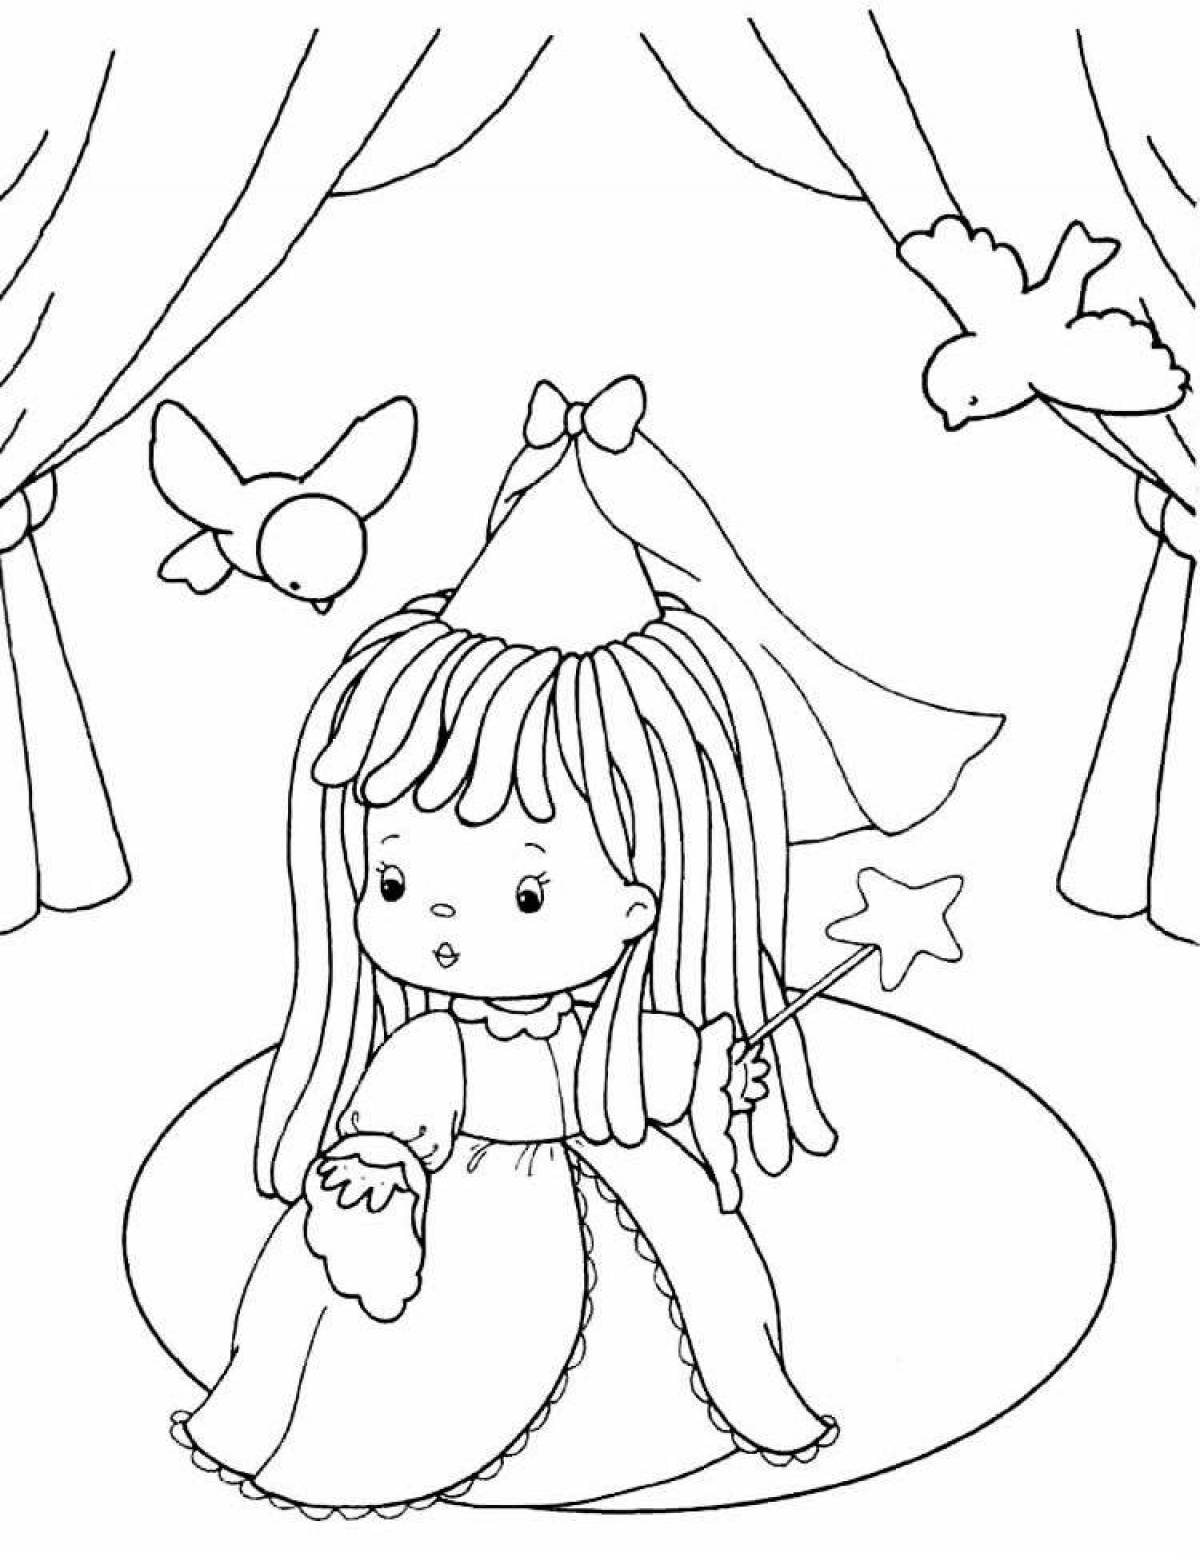 Colorful coloring book for dolls